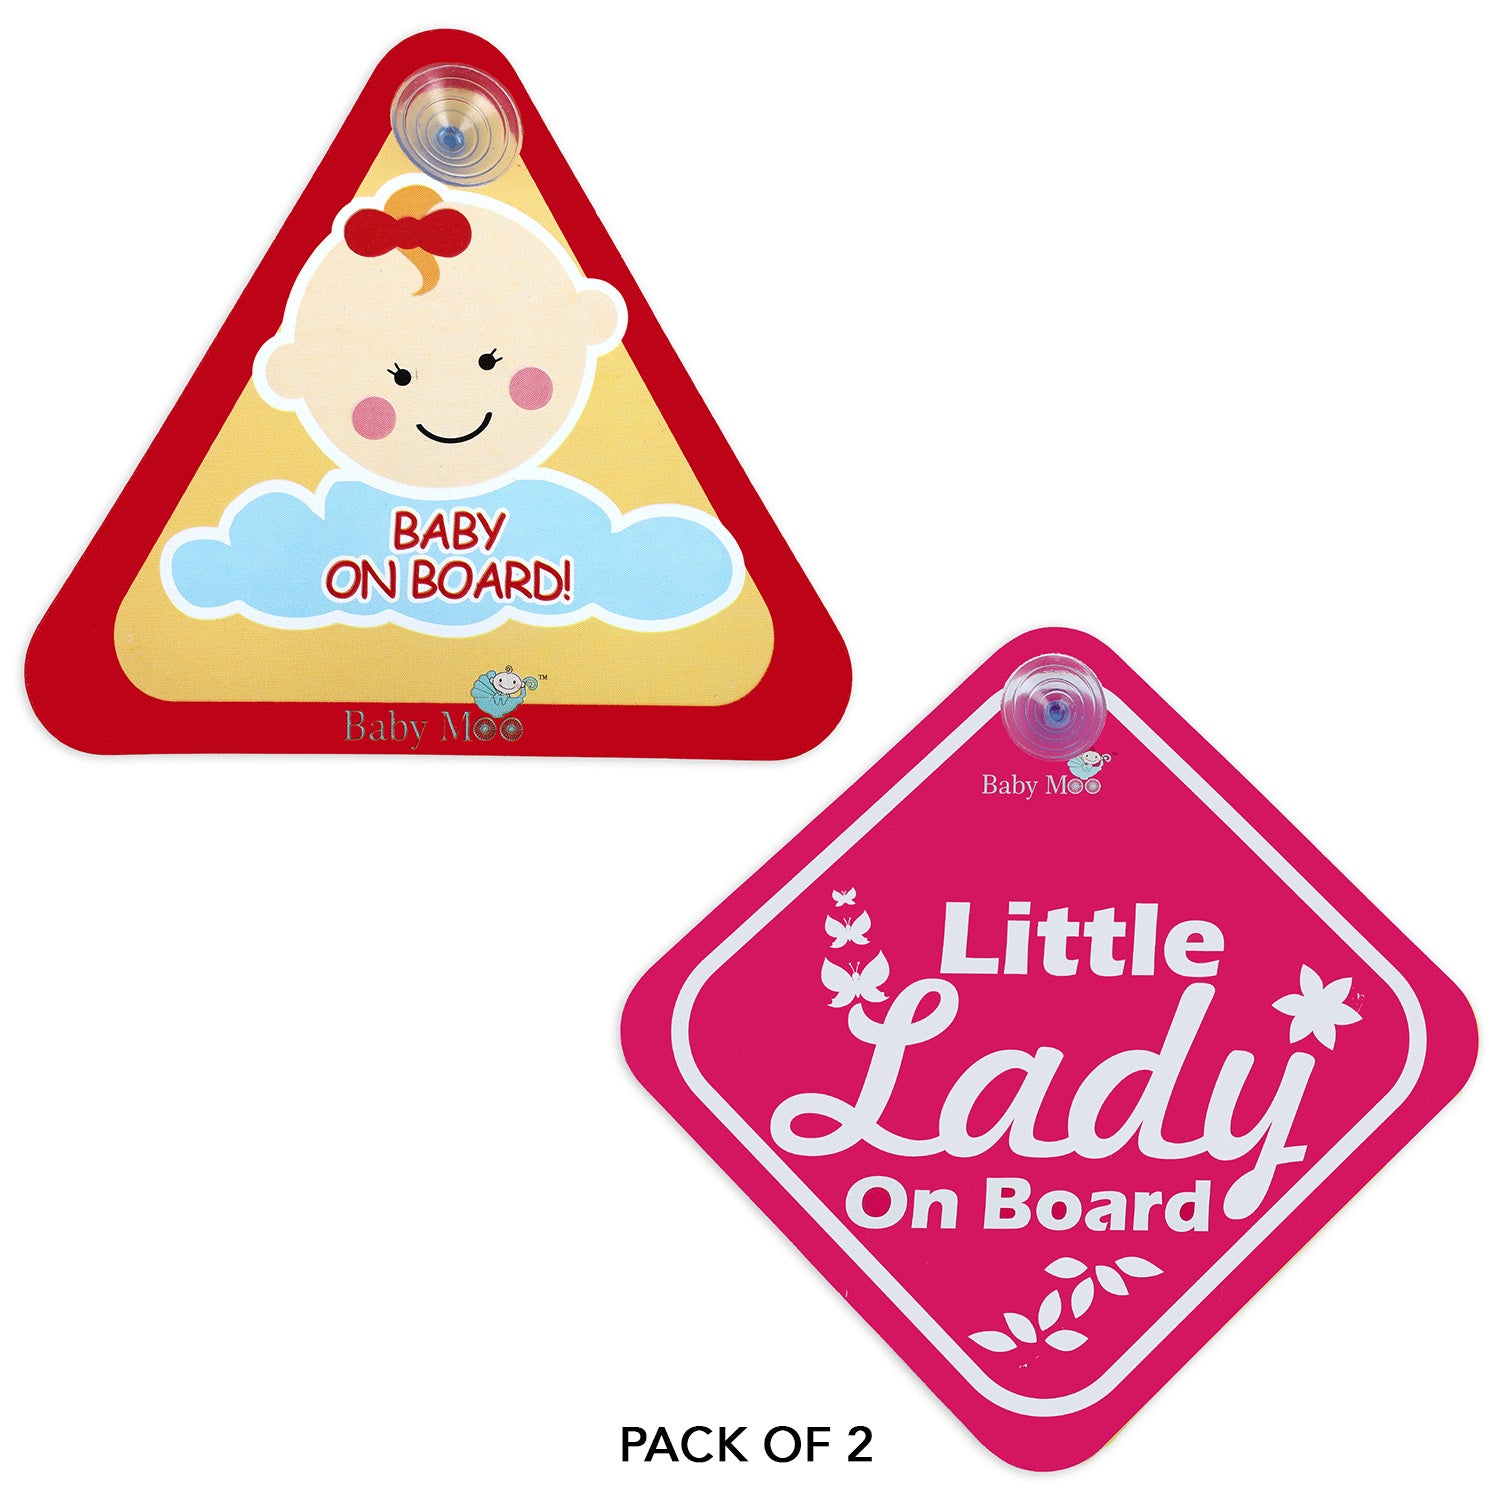 Baby Moo Little Lady And Baby On Board Car Safety Sign With Suction Cup Clip 2 Pack - Pink - Baby Moo